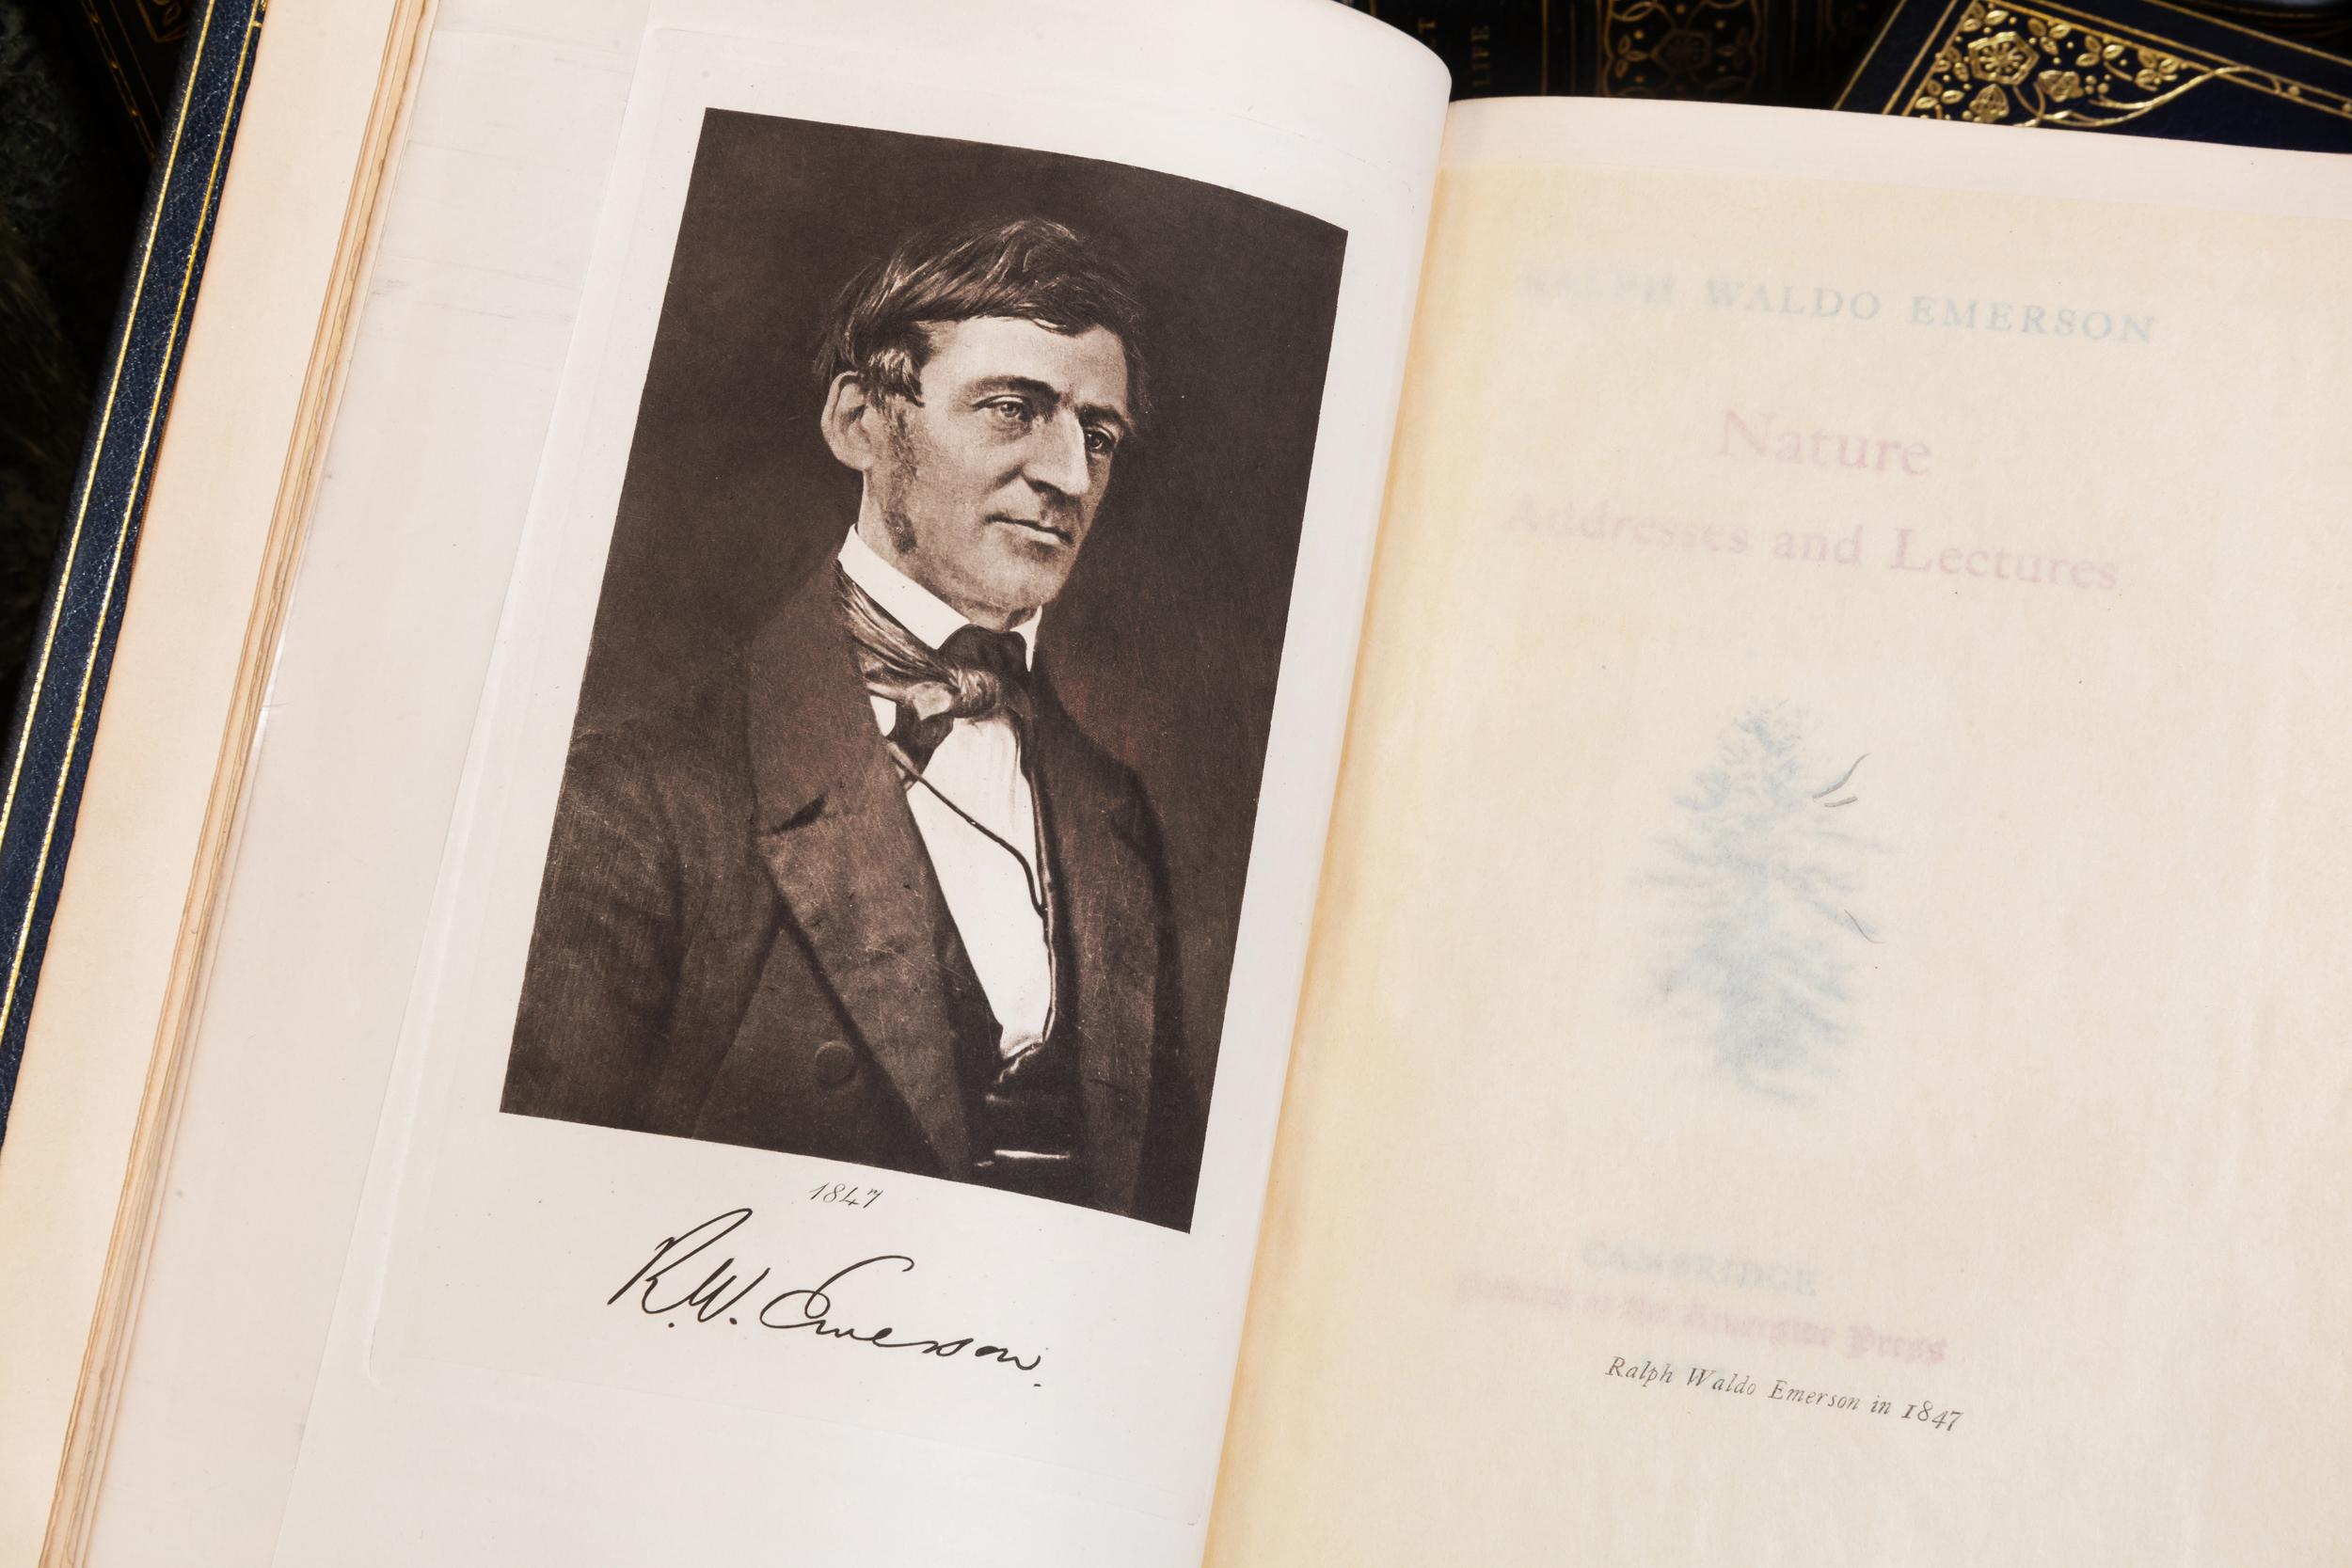 Leather 12 Volumes, Ralph Waldo Emerson, The Complete Works, Autograph Edition